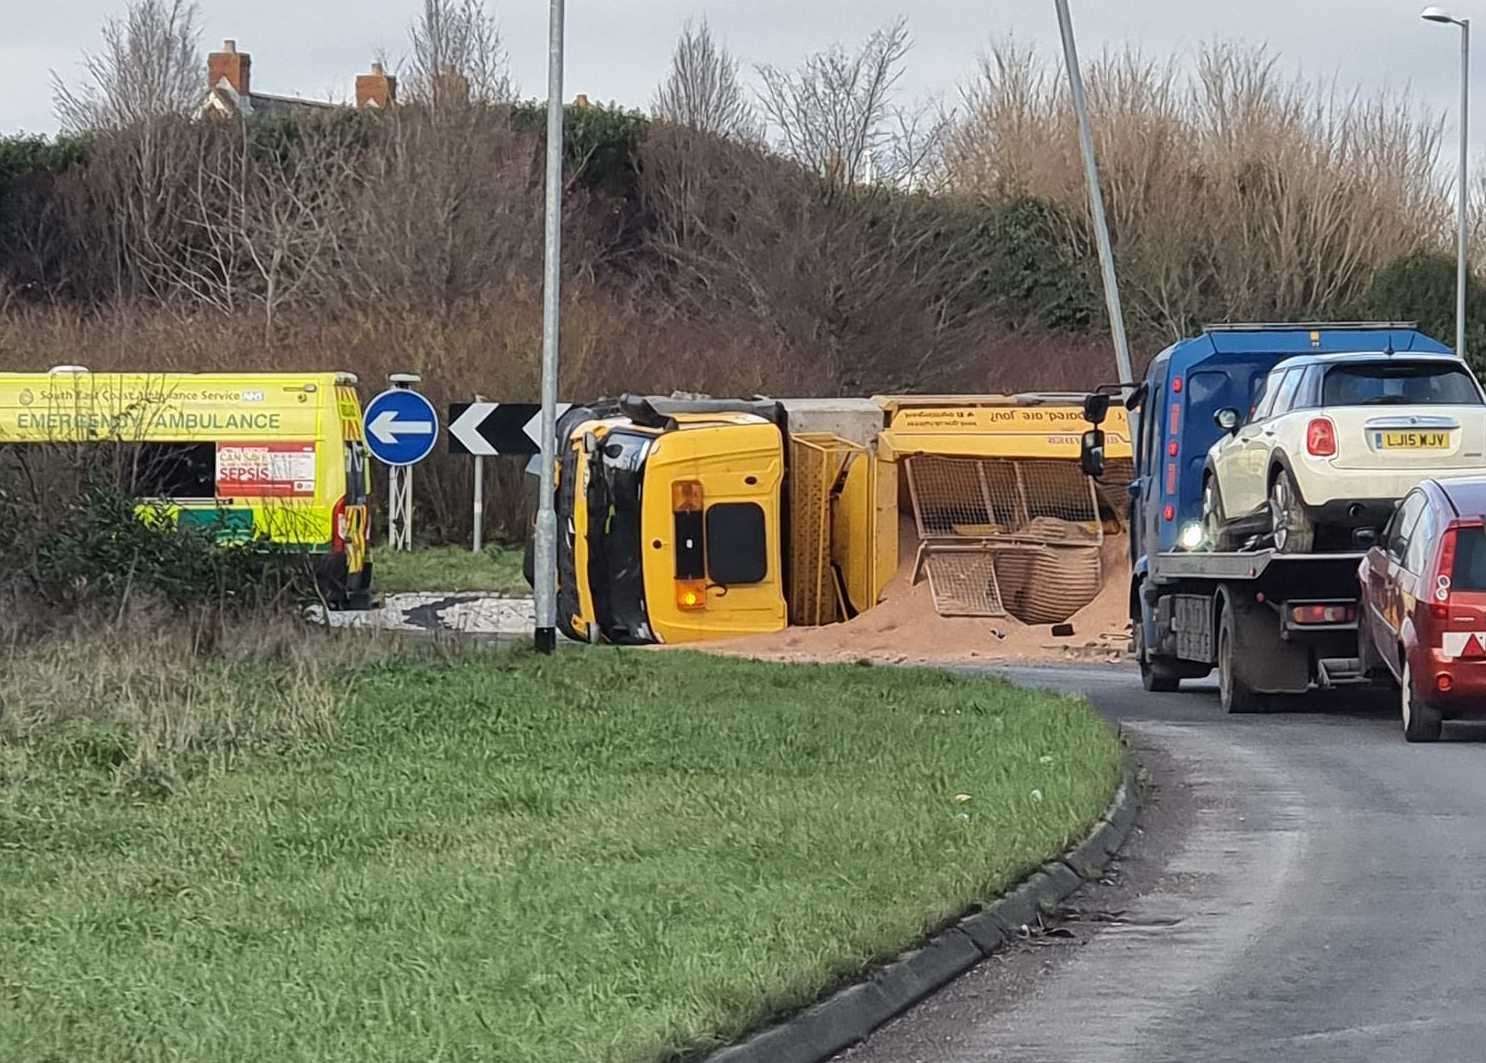 Salt from the overturned lorry covered the road. Picture: Andrew Davis